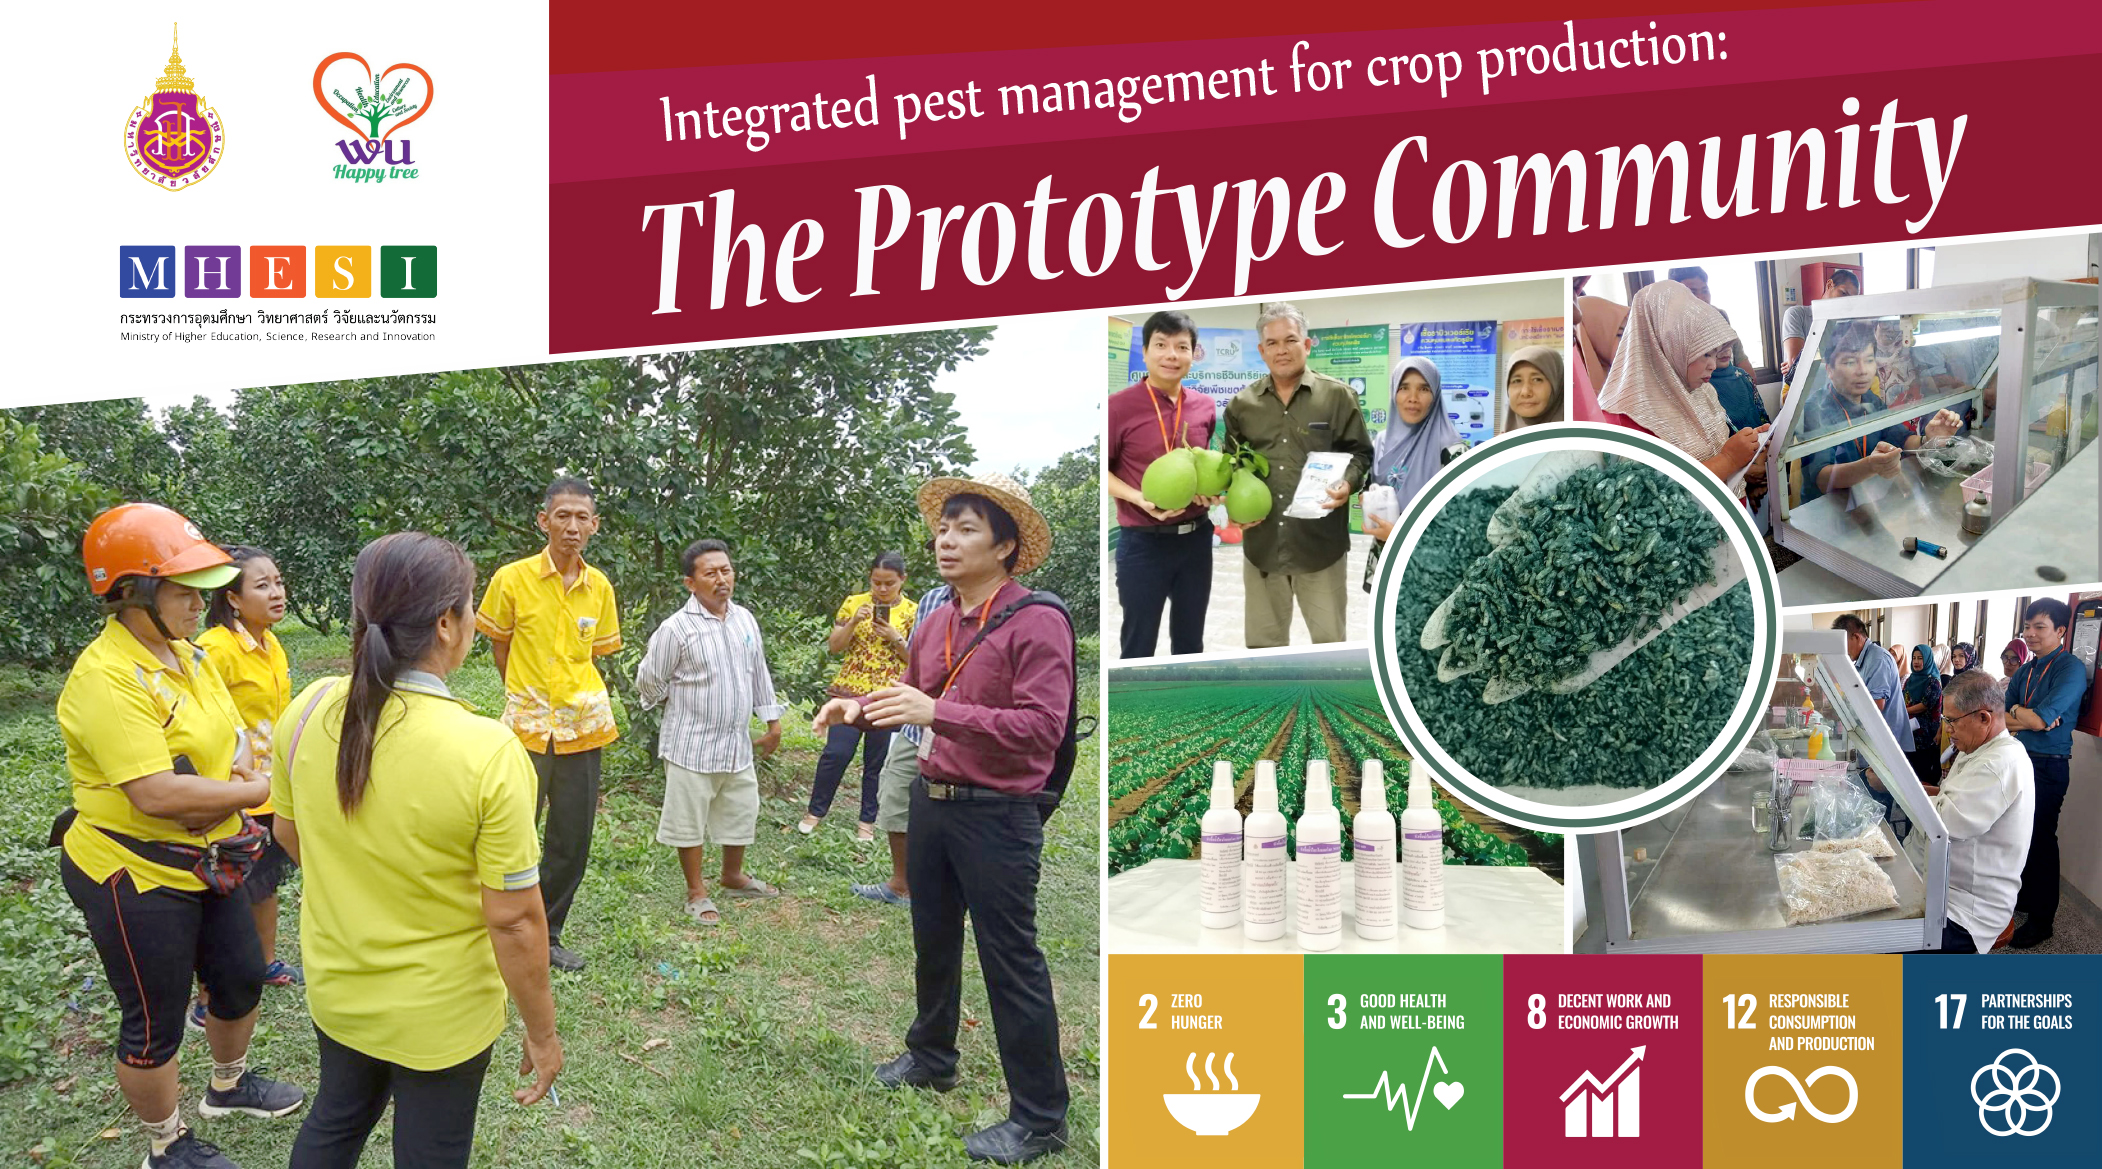 Integrated pest management for crop production: The Prototype Community